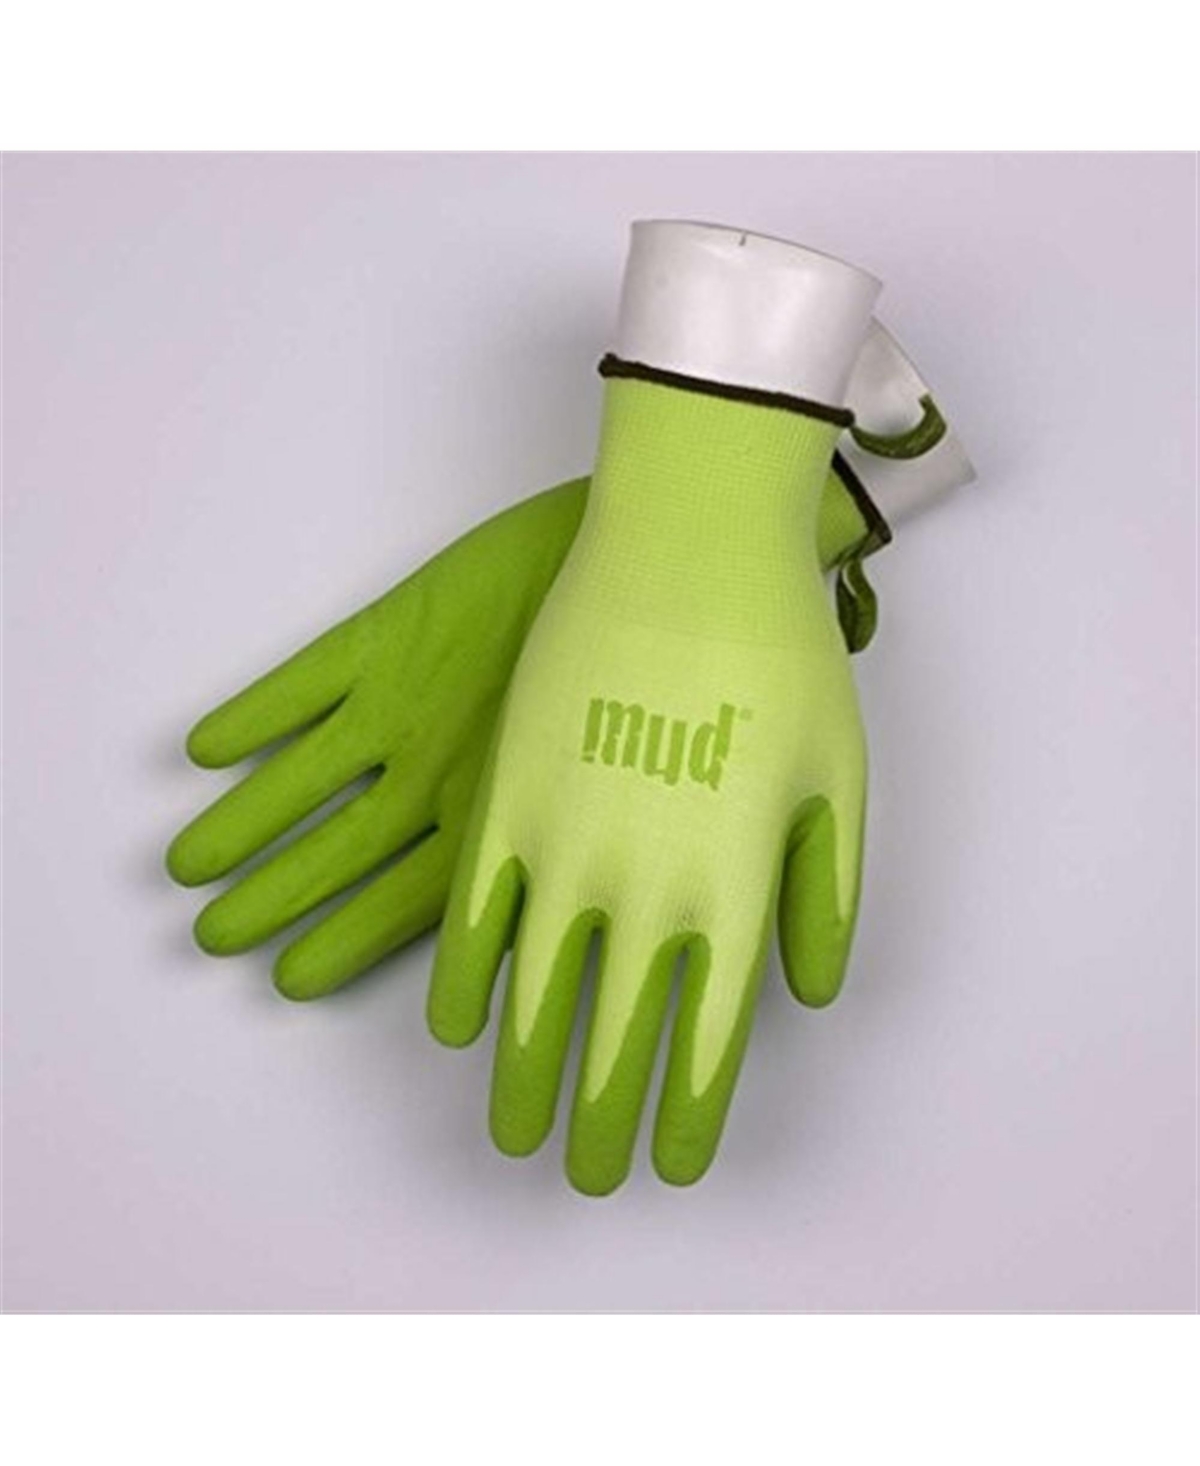 Mud Simply Mud Gloves, Nitrile Coated Gloves For Gardening and Work, Kiwi, Small - Green